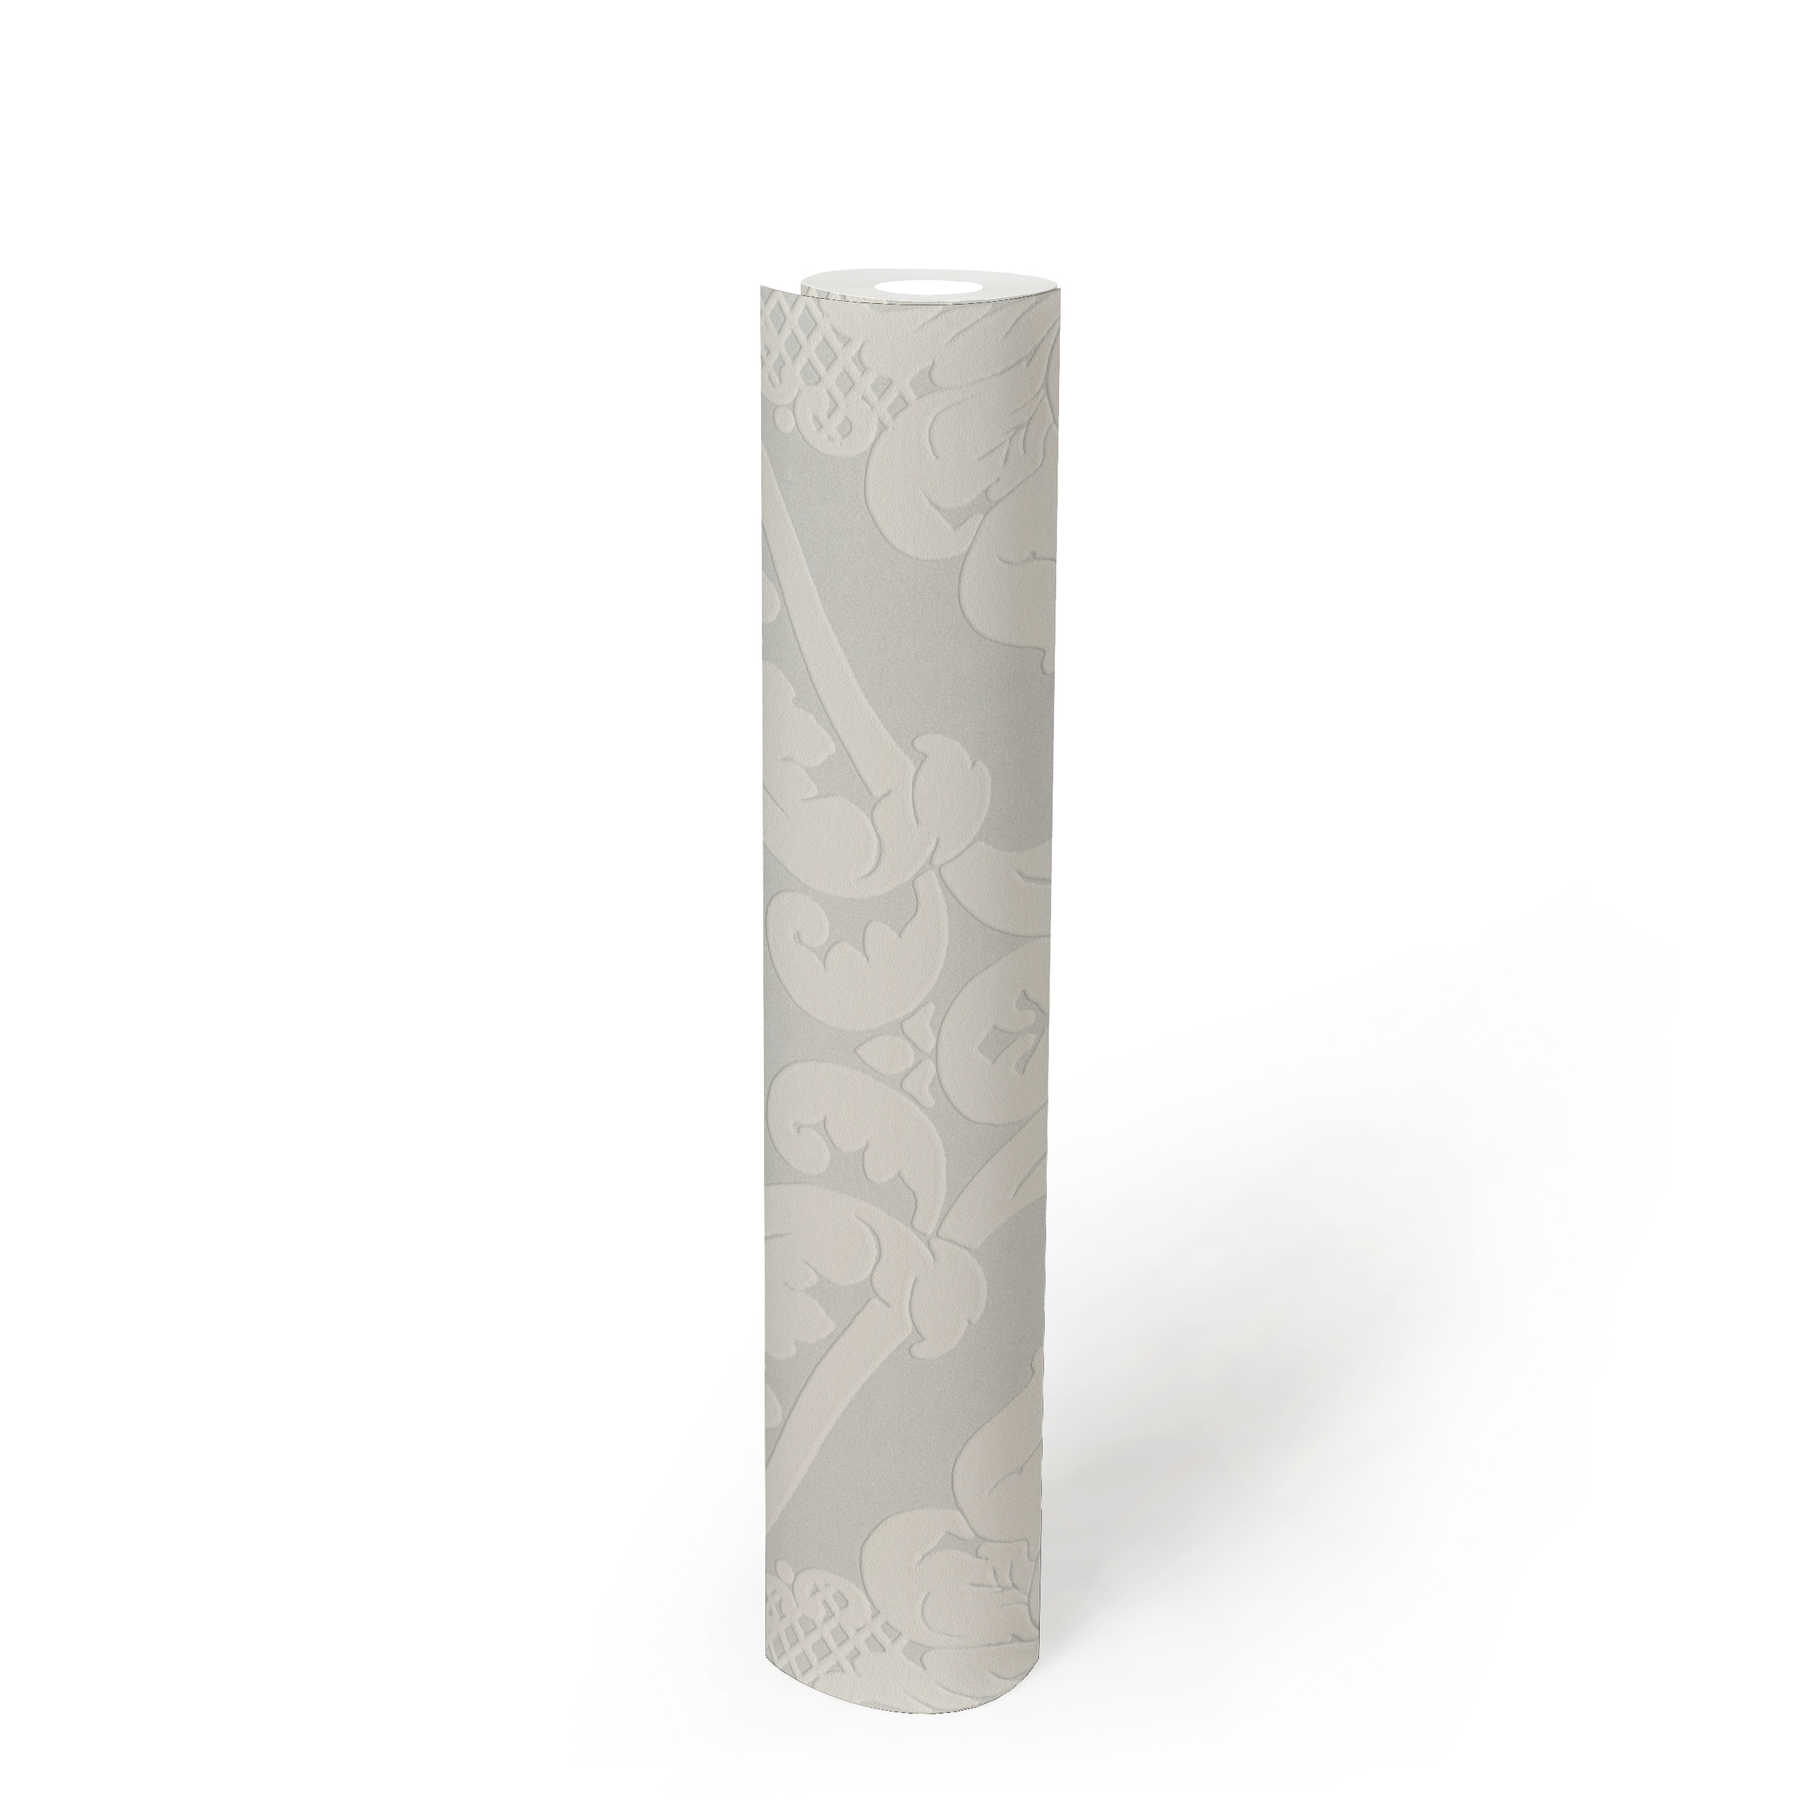             Baroque wallpaper with 3D floral ornament - metallic, white
        